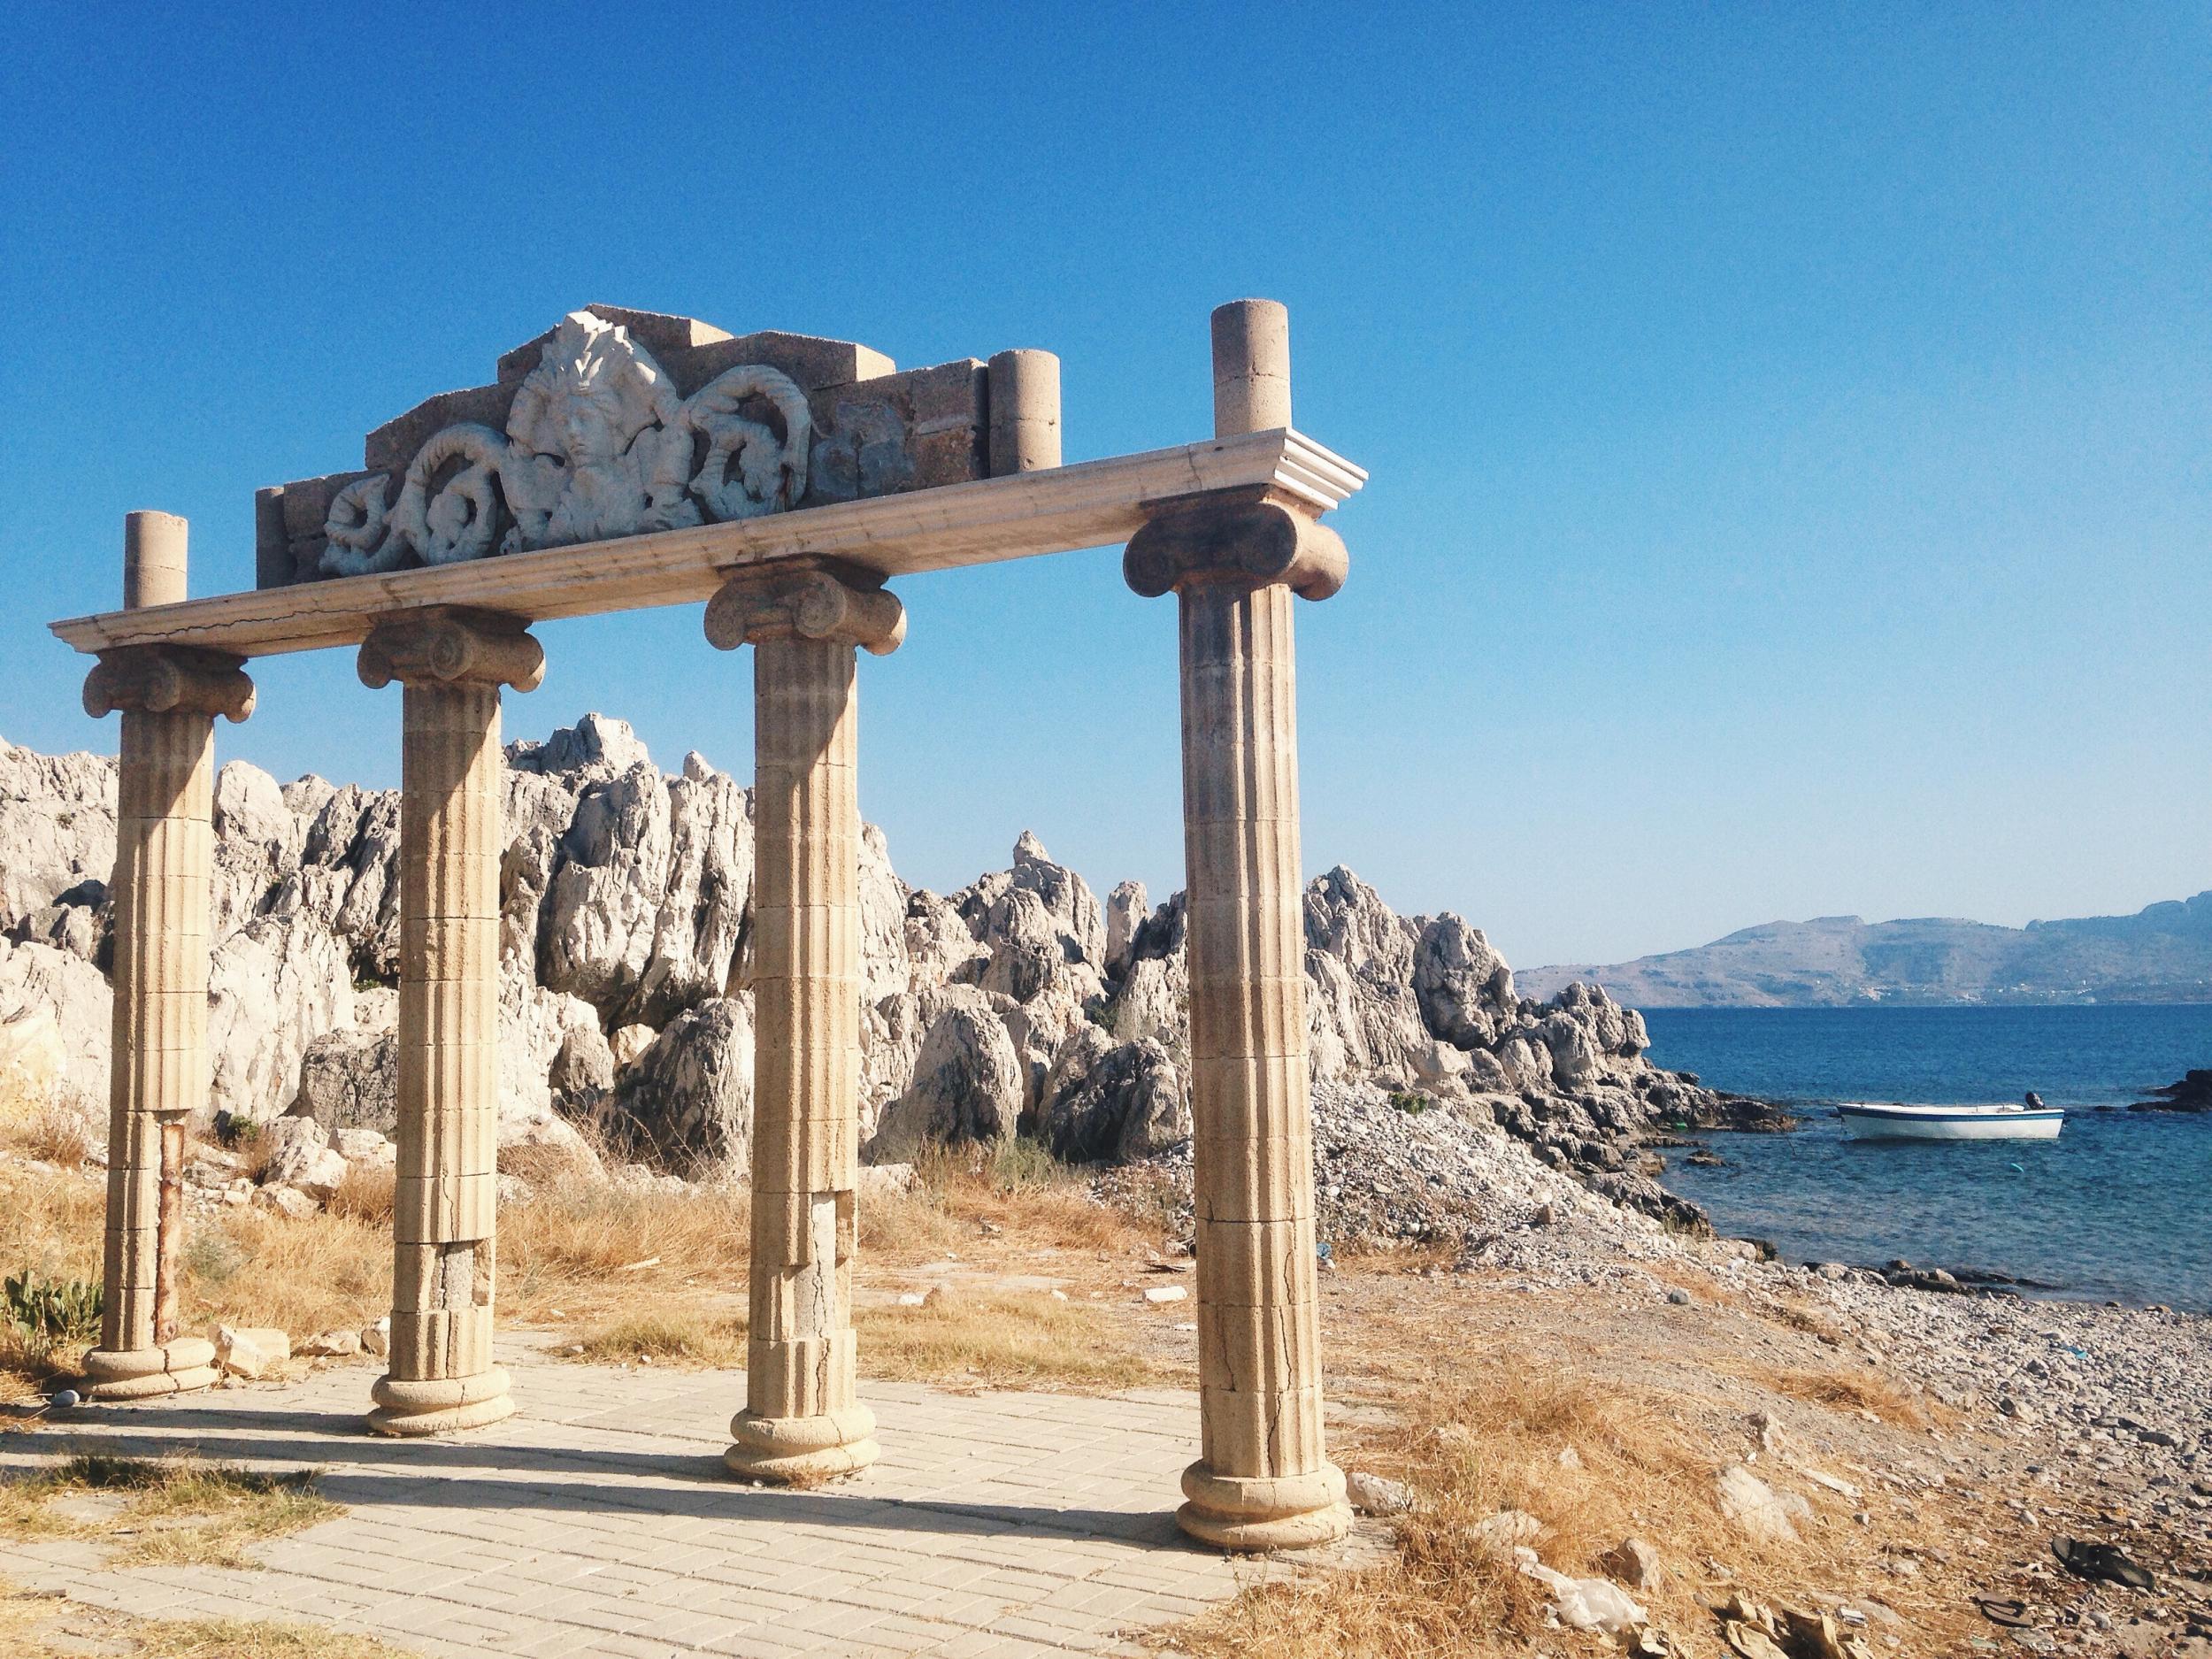 At Haraki Bay you can admire ancient ruins as well as the view out to sea